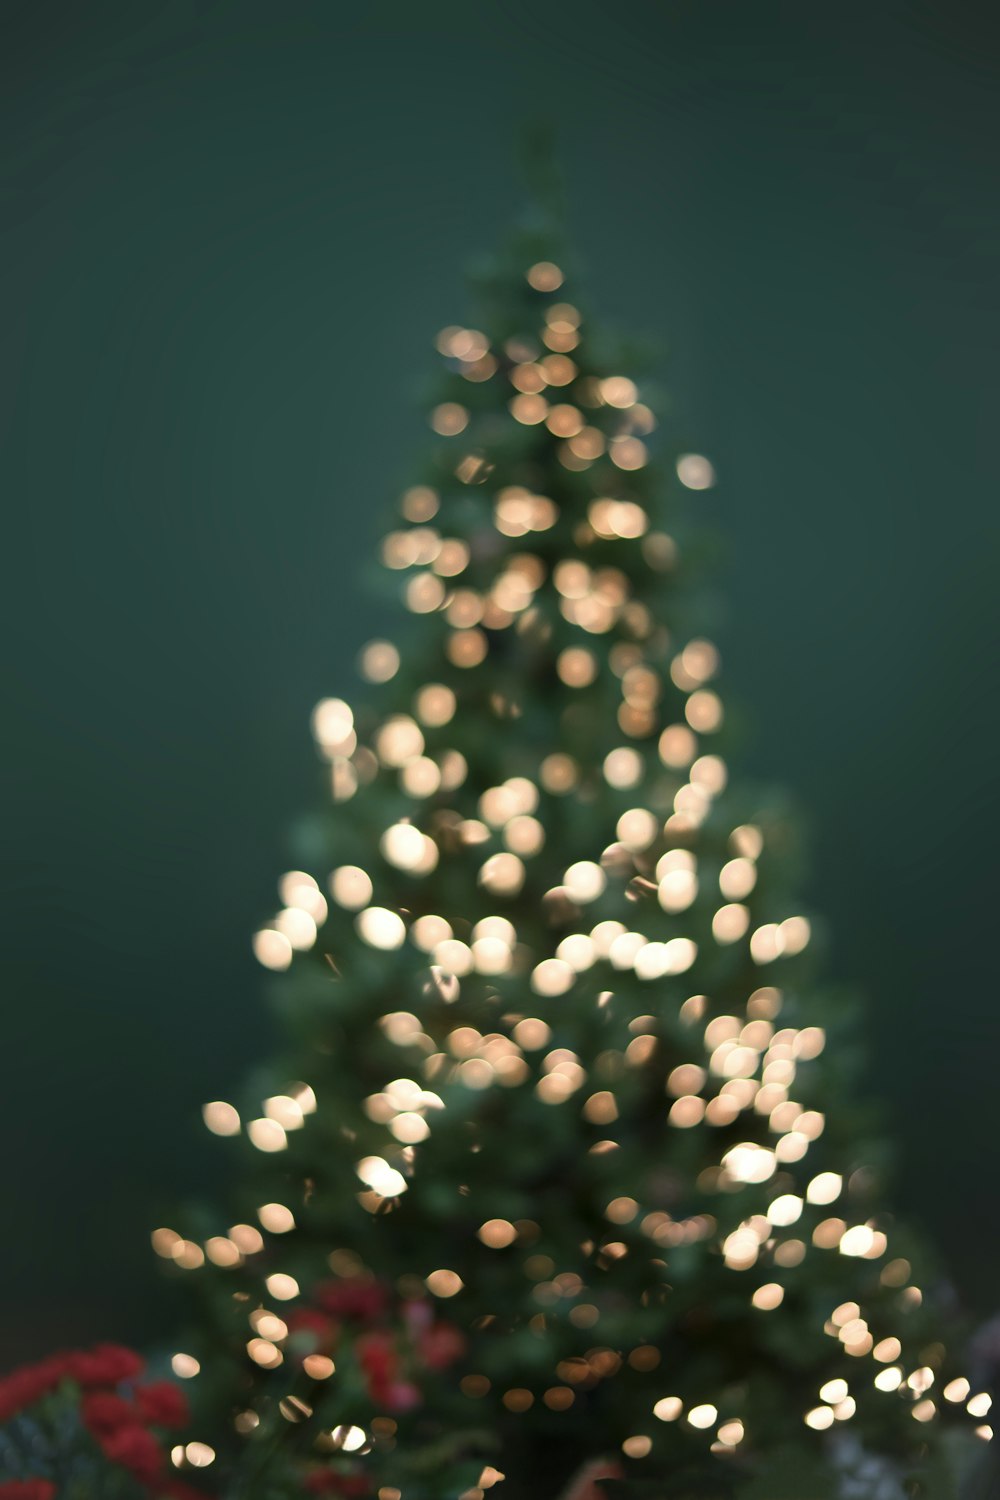 900+ Christmas Tree Images: Download HD Pictures & Photos on Unsplash